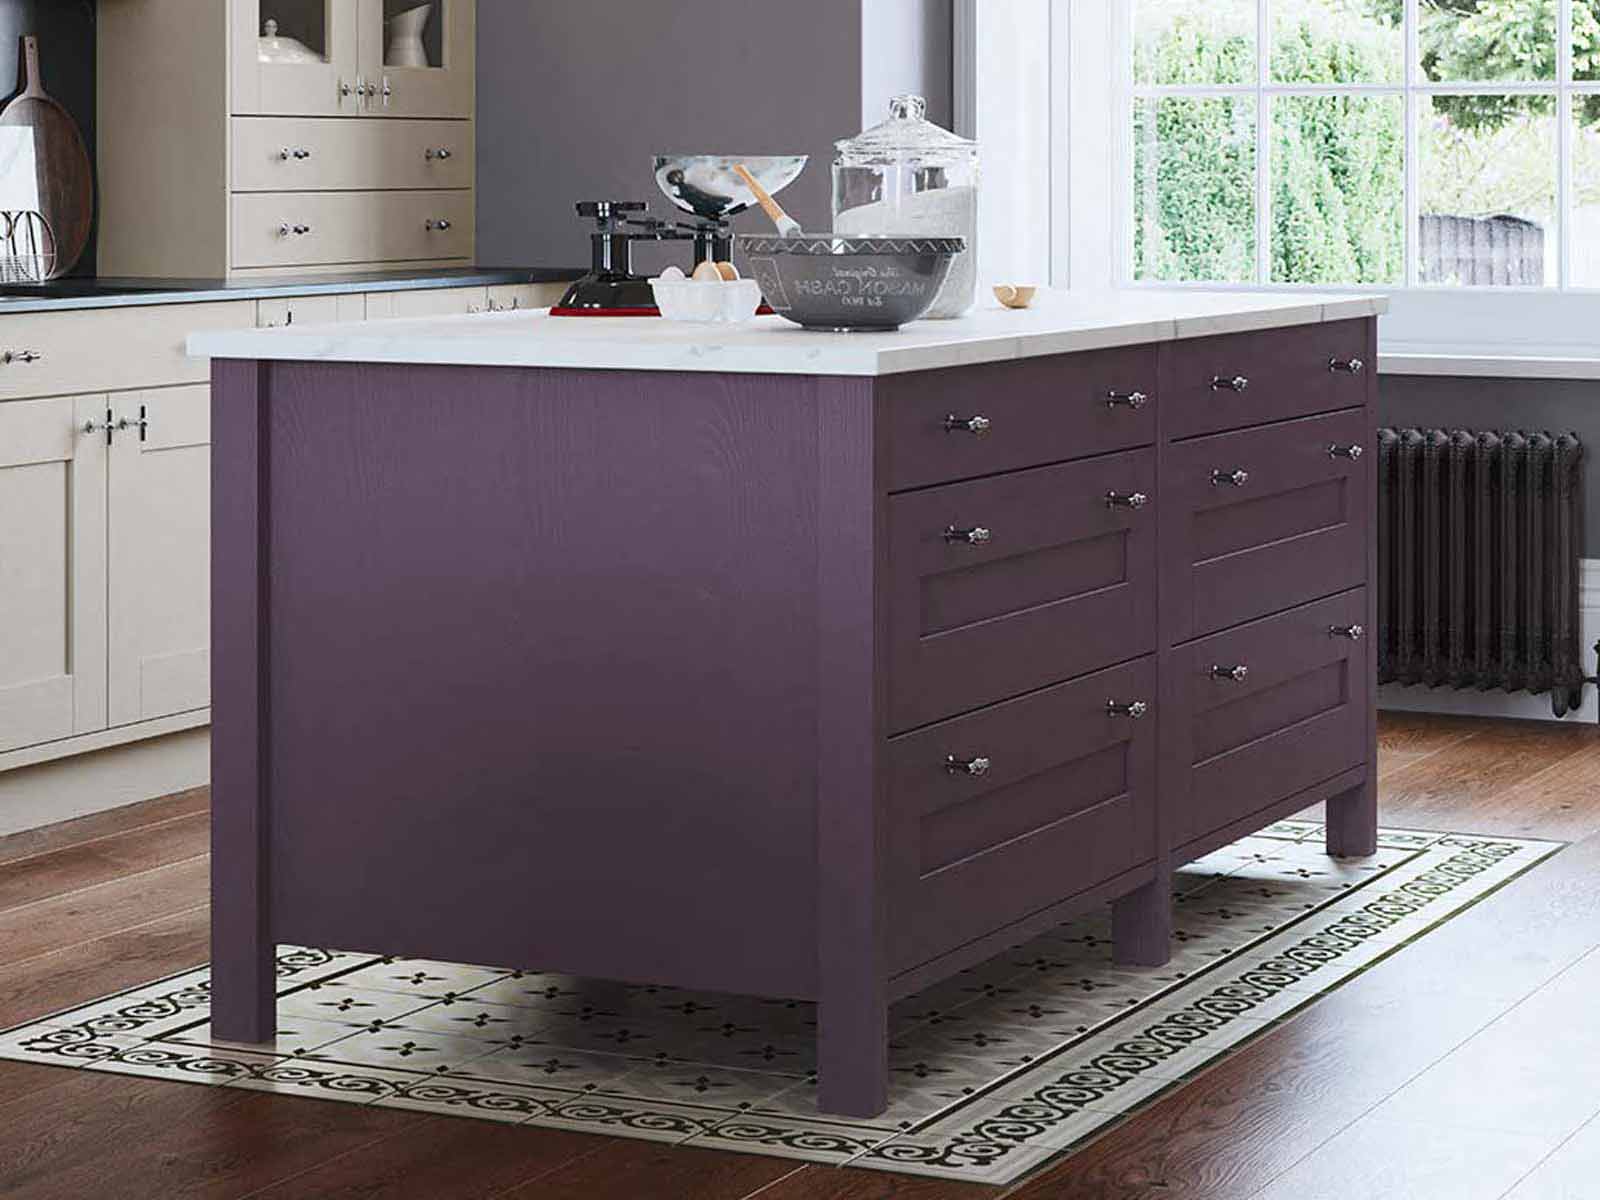 A purple kitchen island with a while marble worktop and ivory cabinets